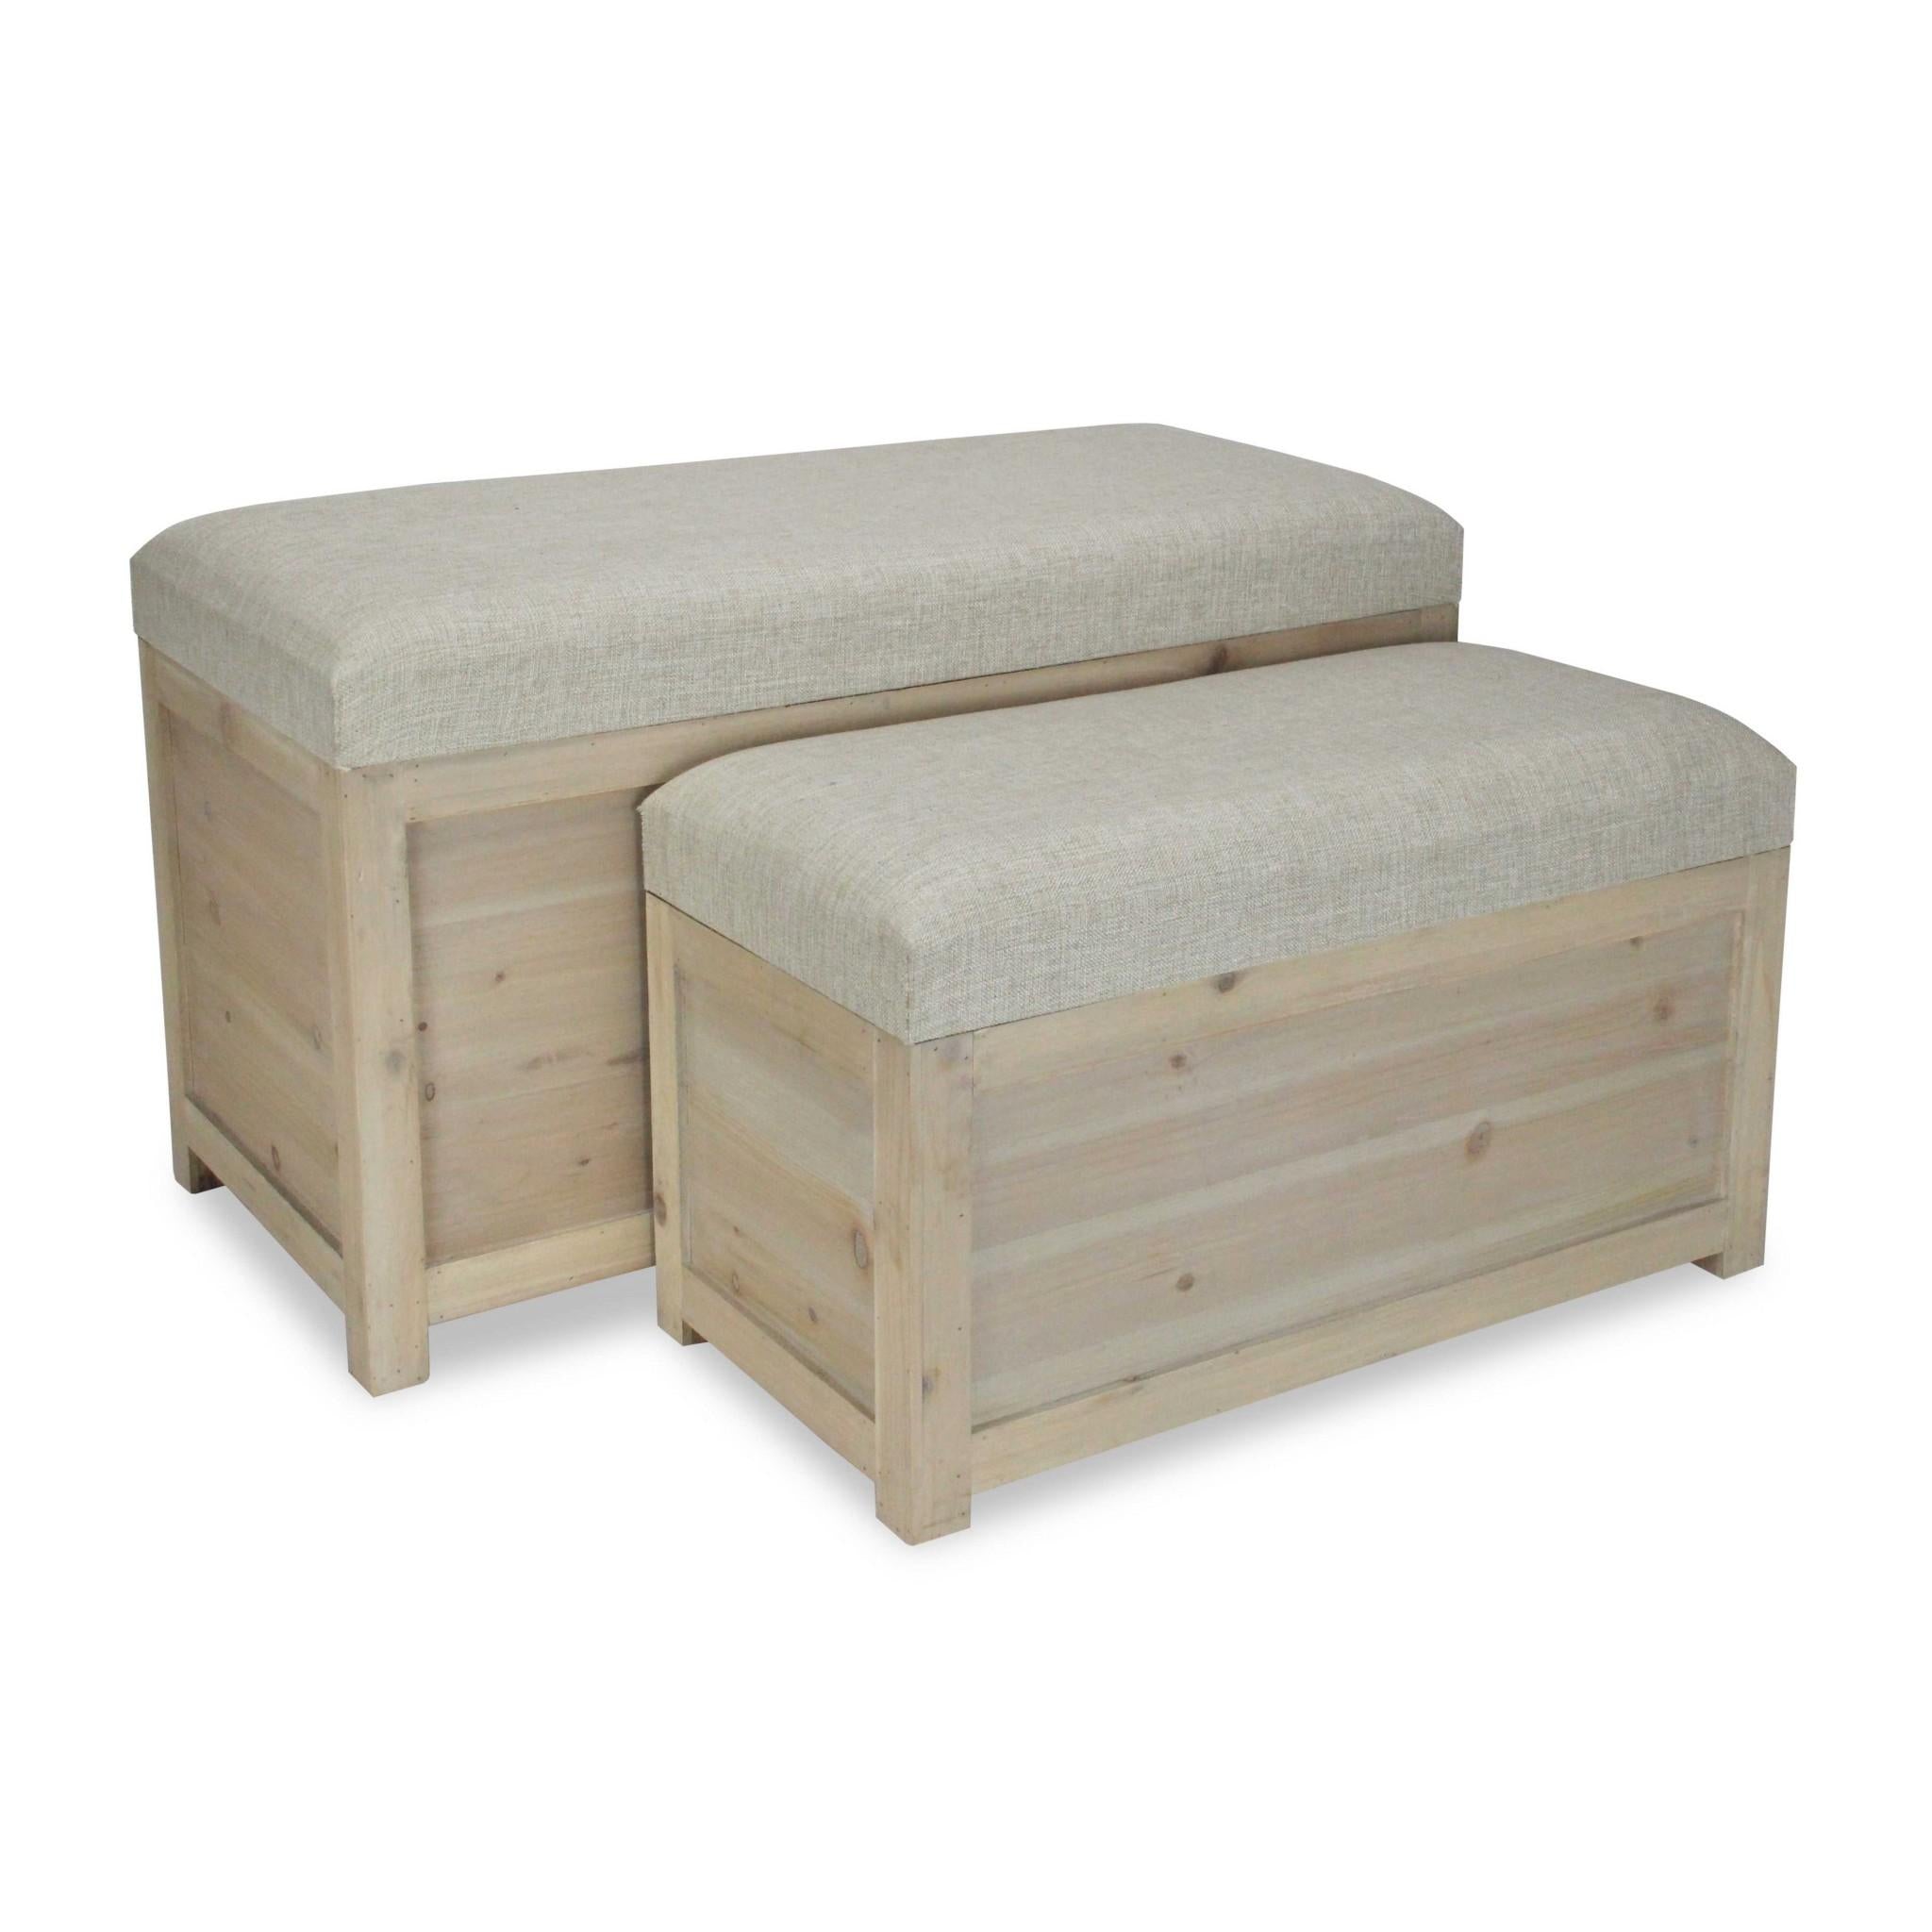 Set of 2 Rectangular White Linen Fabric and Wood Storage Benches